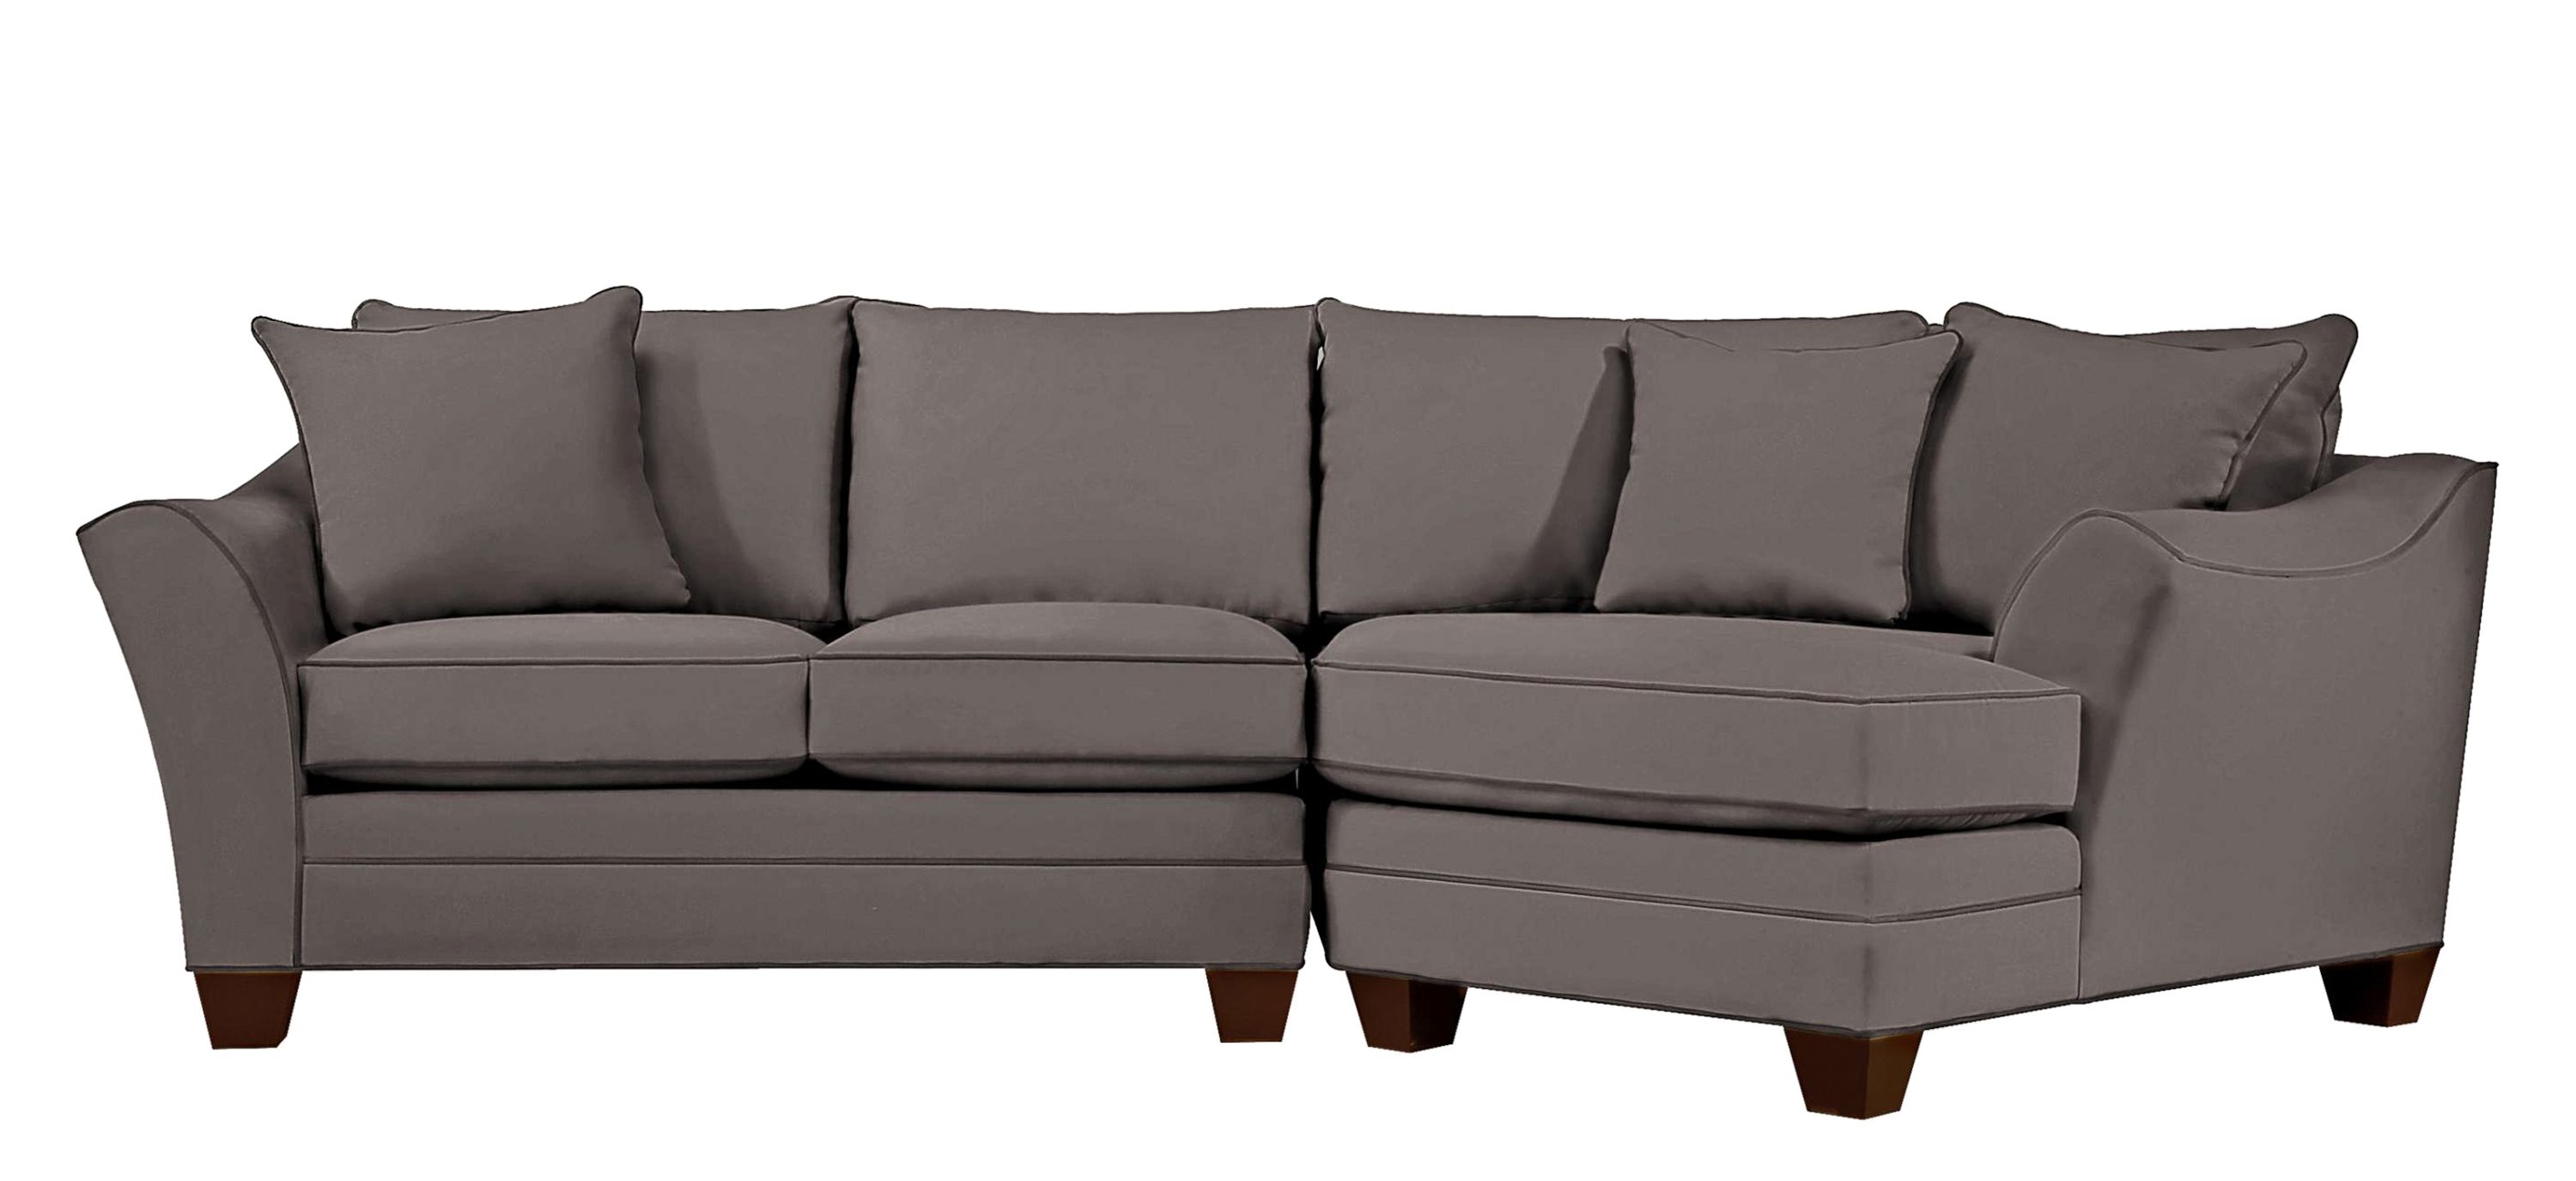 Foresthill 2-pc. Right Hand Facing Microfiber Sectional Sofa